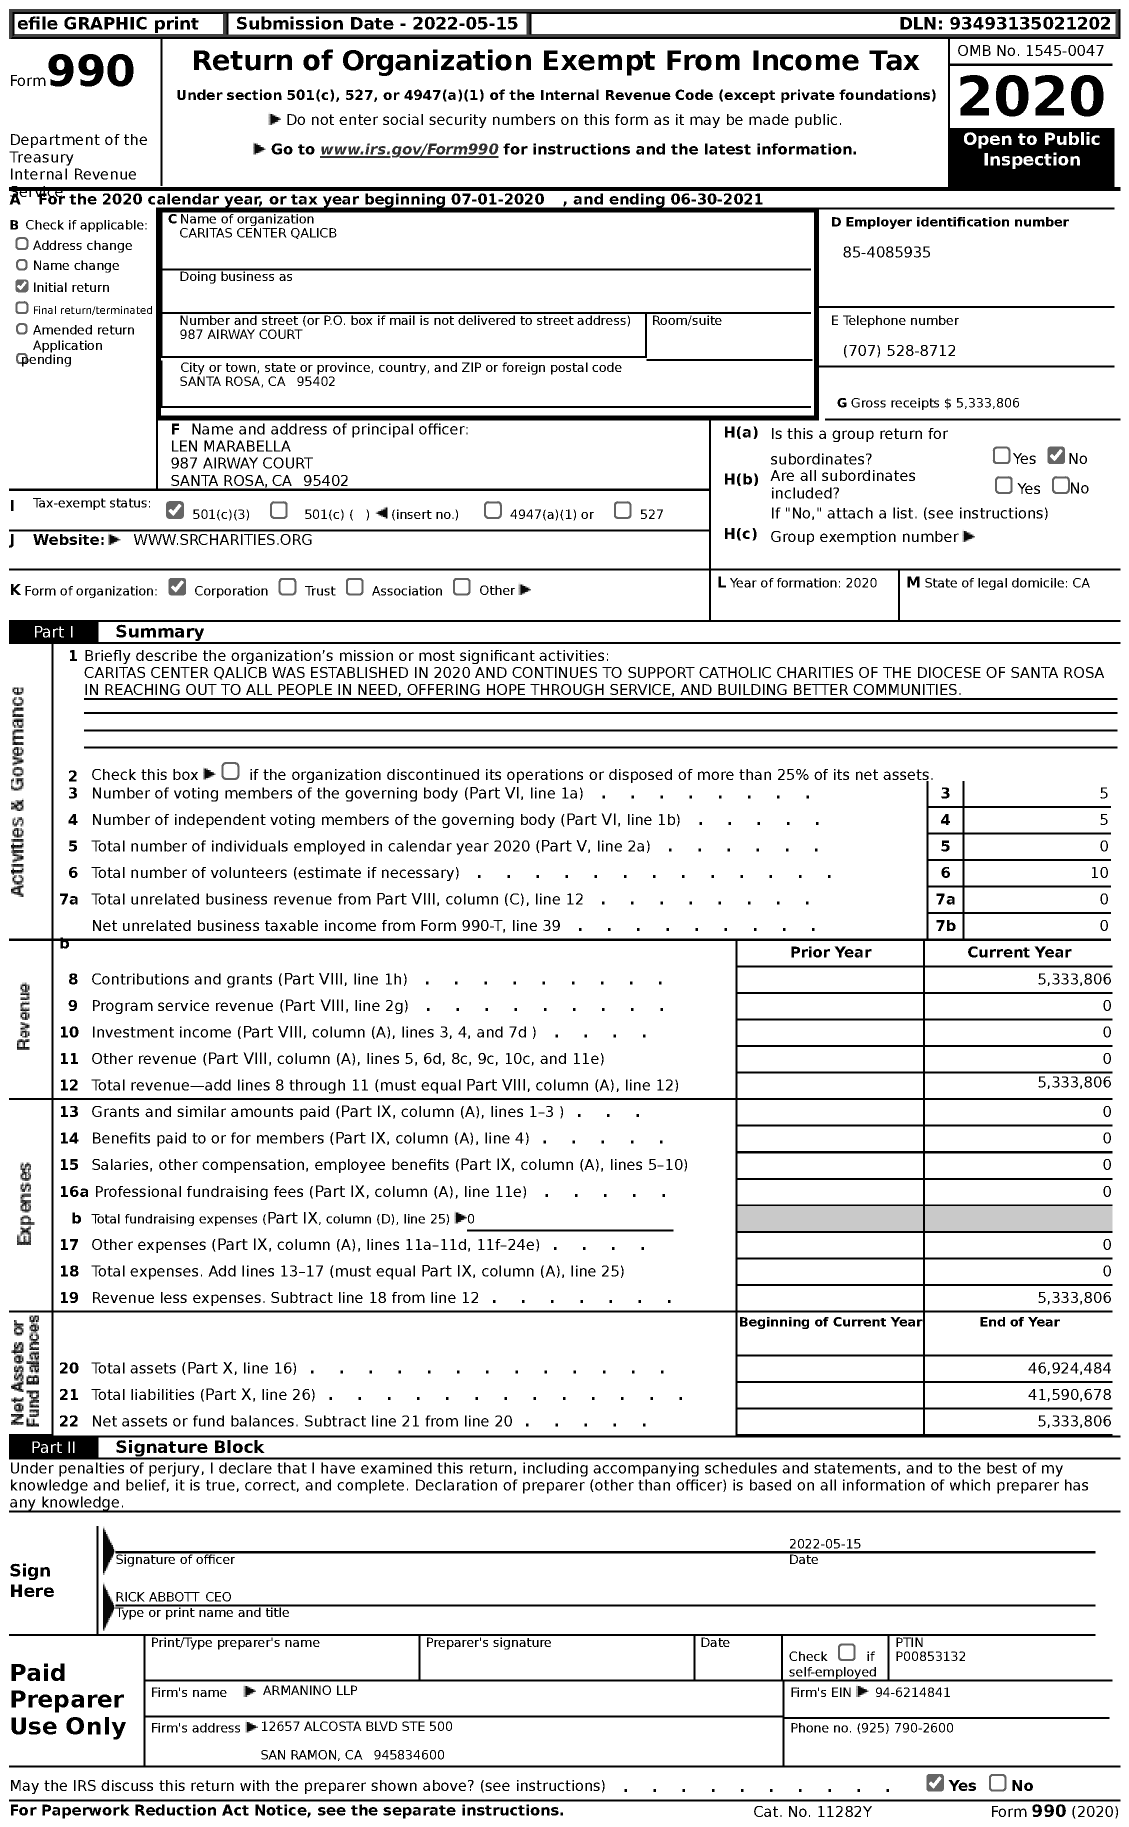 Image of first page of 2020 Form 990 for Caritas Center Qalicb